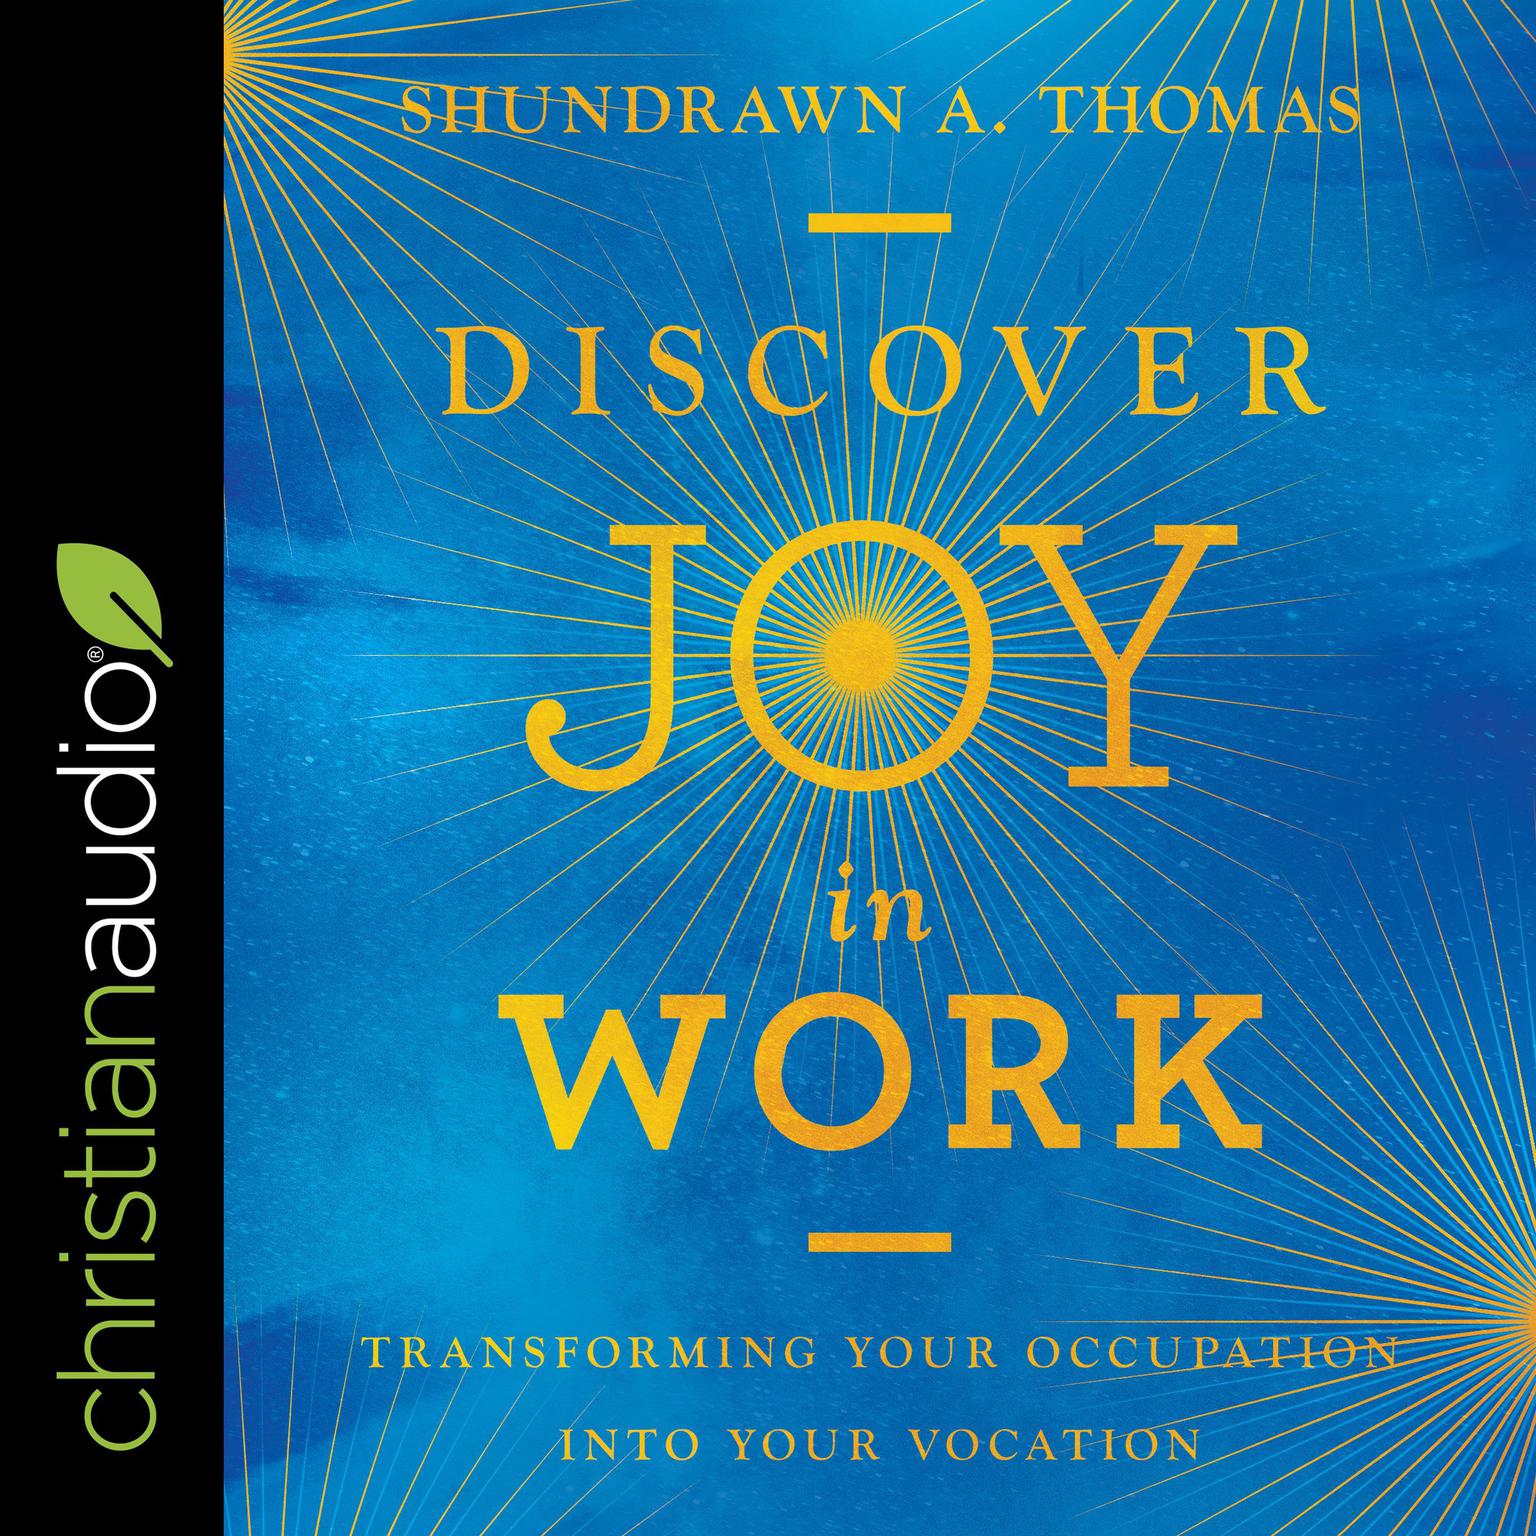 Discover Joy in Work: Transforming Your Occupation into Your Vocation Audiobook, by Shundrawn A. Thomas